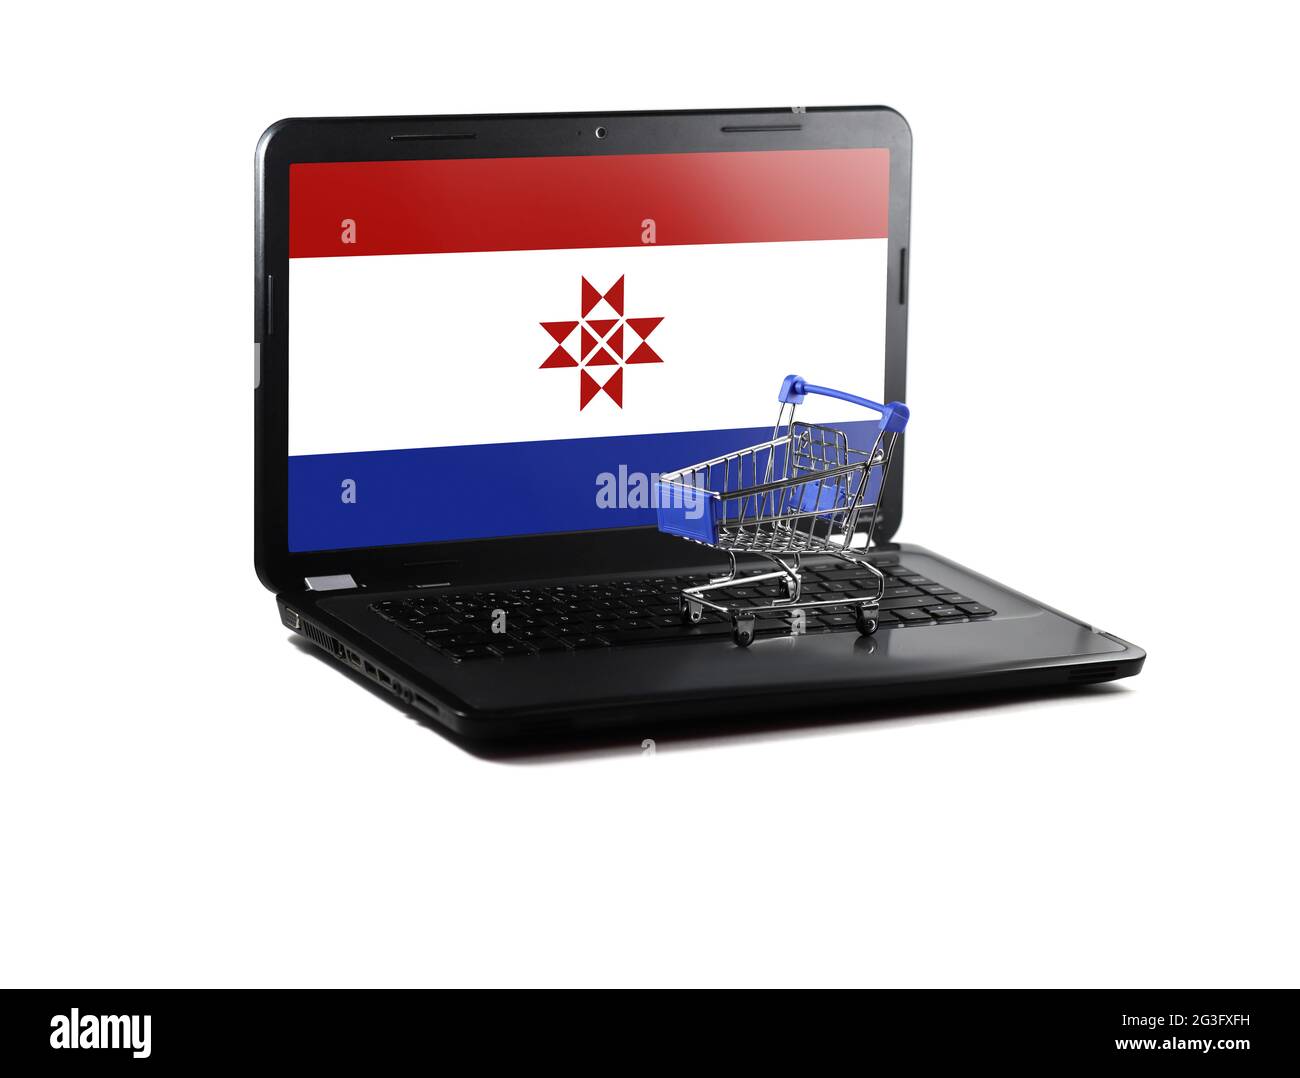 Isolated on white background laptop with Mordovia flag on display, online shopping sale concept Stock Photo